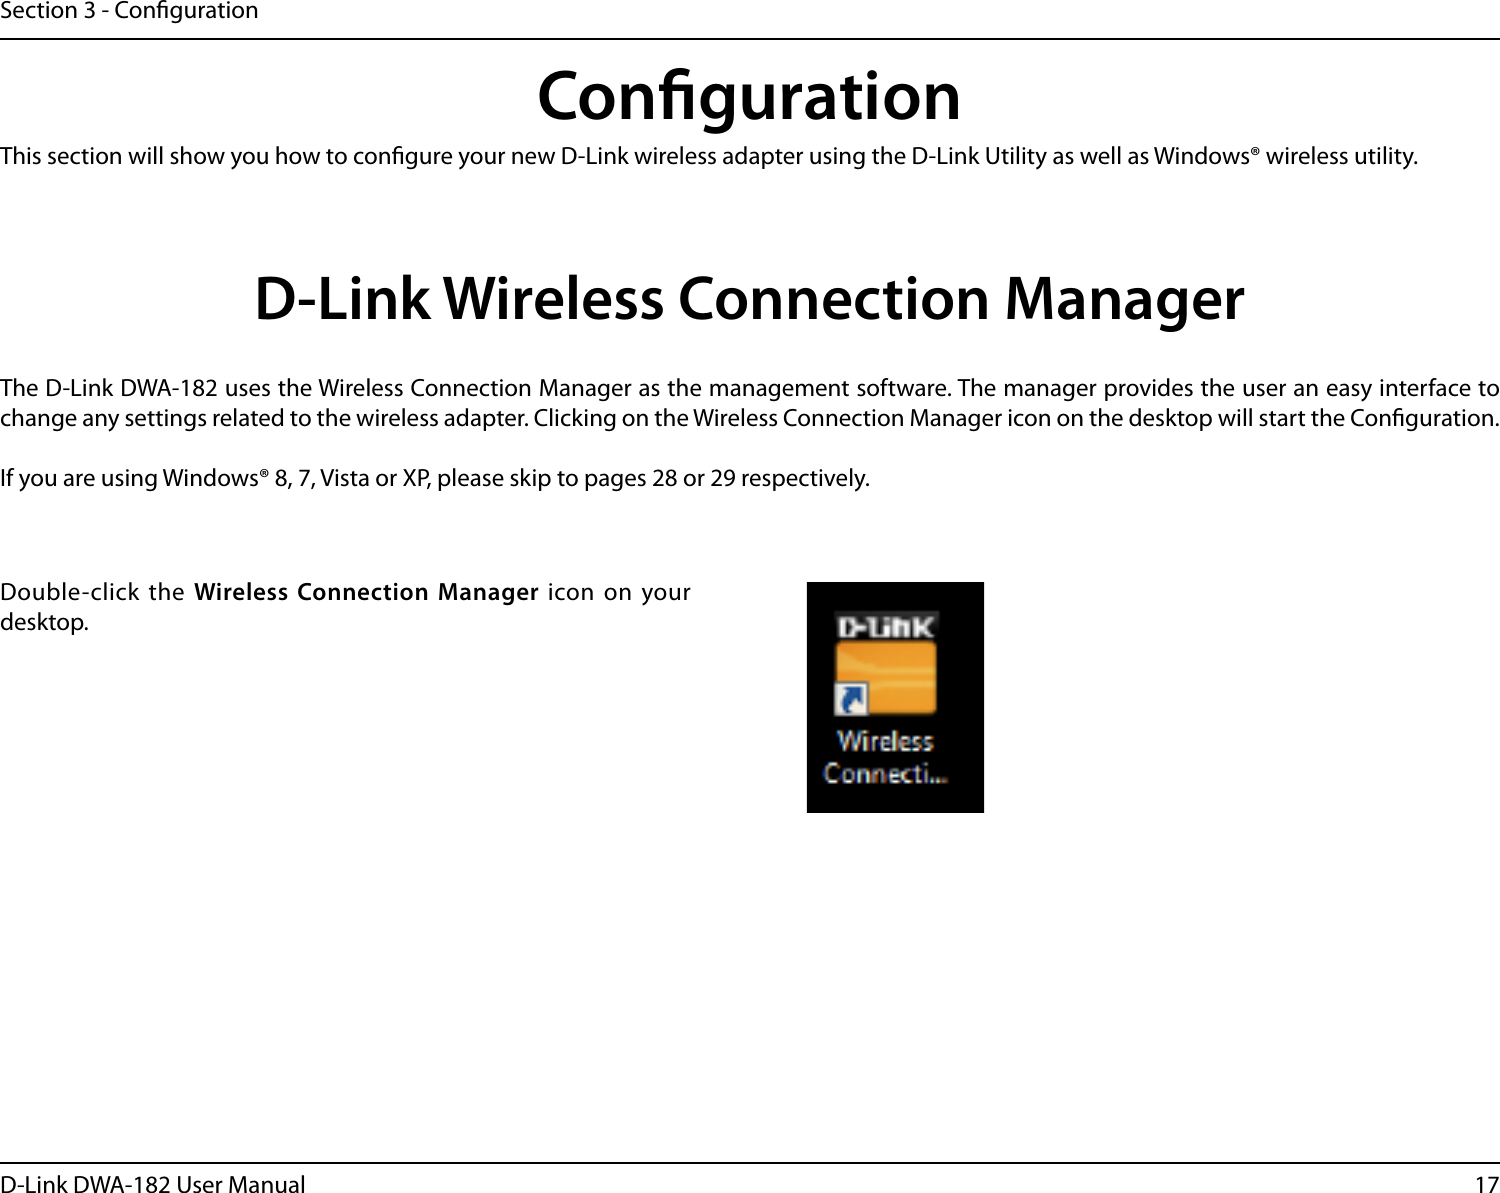 17D-Link DWA-182 User ManualSection 3 - CongurationCongurationThis section will show you how to congure your new D-Link wireless adapter using the D-Link Utility as well as Windows® wireless utility.D-Link Wireless Connection ManagerThe D-Link DWA-182 uses the Wireless Connection Manager as the management software. The manager provides the user an easy interface to change any settings related to the wireless adapter. Clicking on the Wireless Connection Manager icon on the desktop will start the Conguration.If you are using Windows® 8, 7, Vista or XP, please skip to pages 28 or 29 respectively.Double-click the Wireless Connection Manager icon on your desktop.